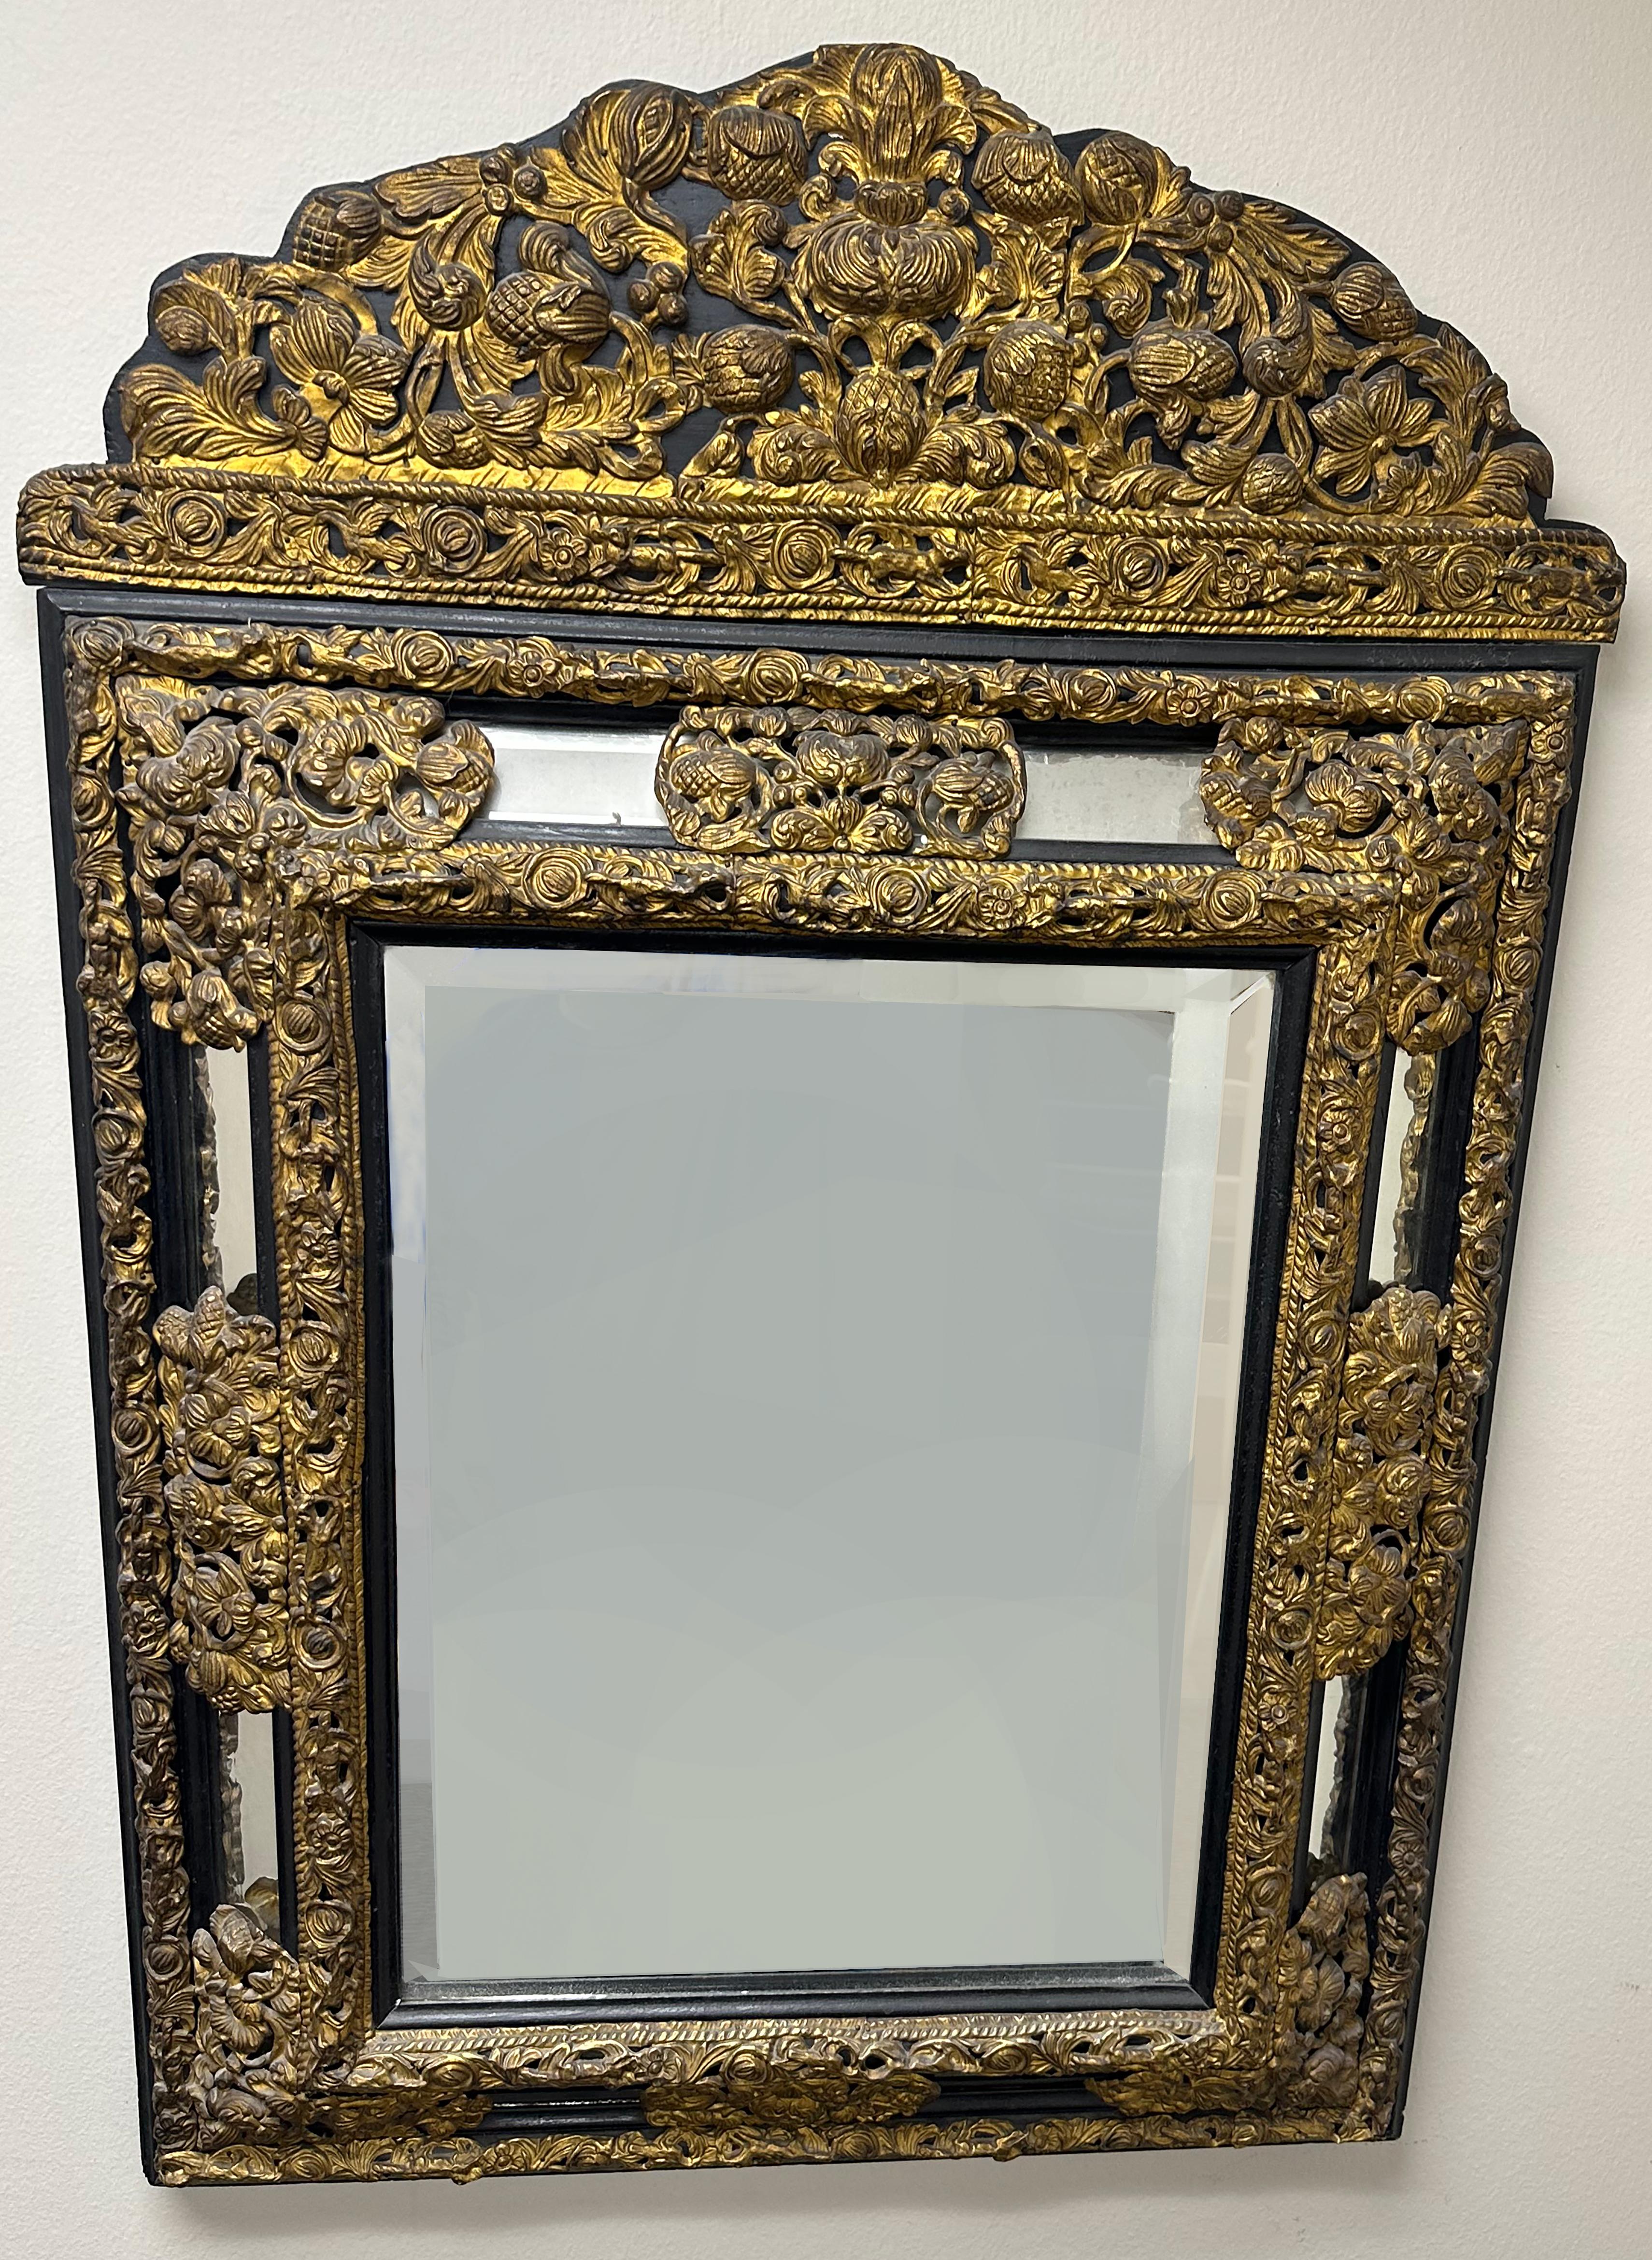 19th Century Dutch Embossed Brass and Ebony Mirror In Excellent Condition For Sale In Dallas, TX